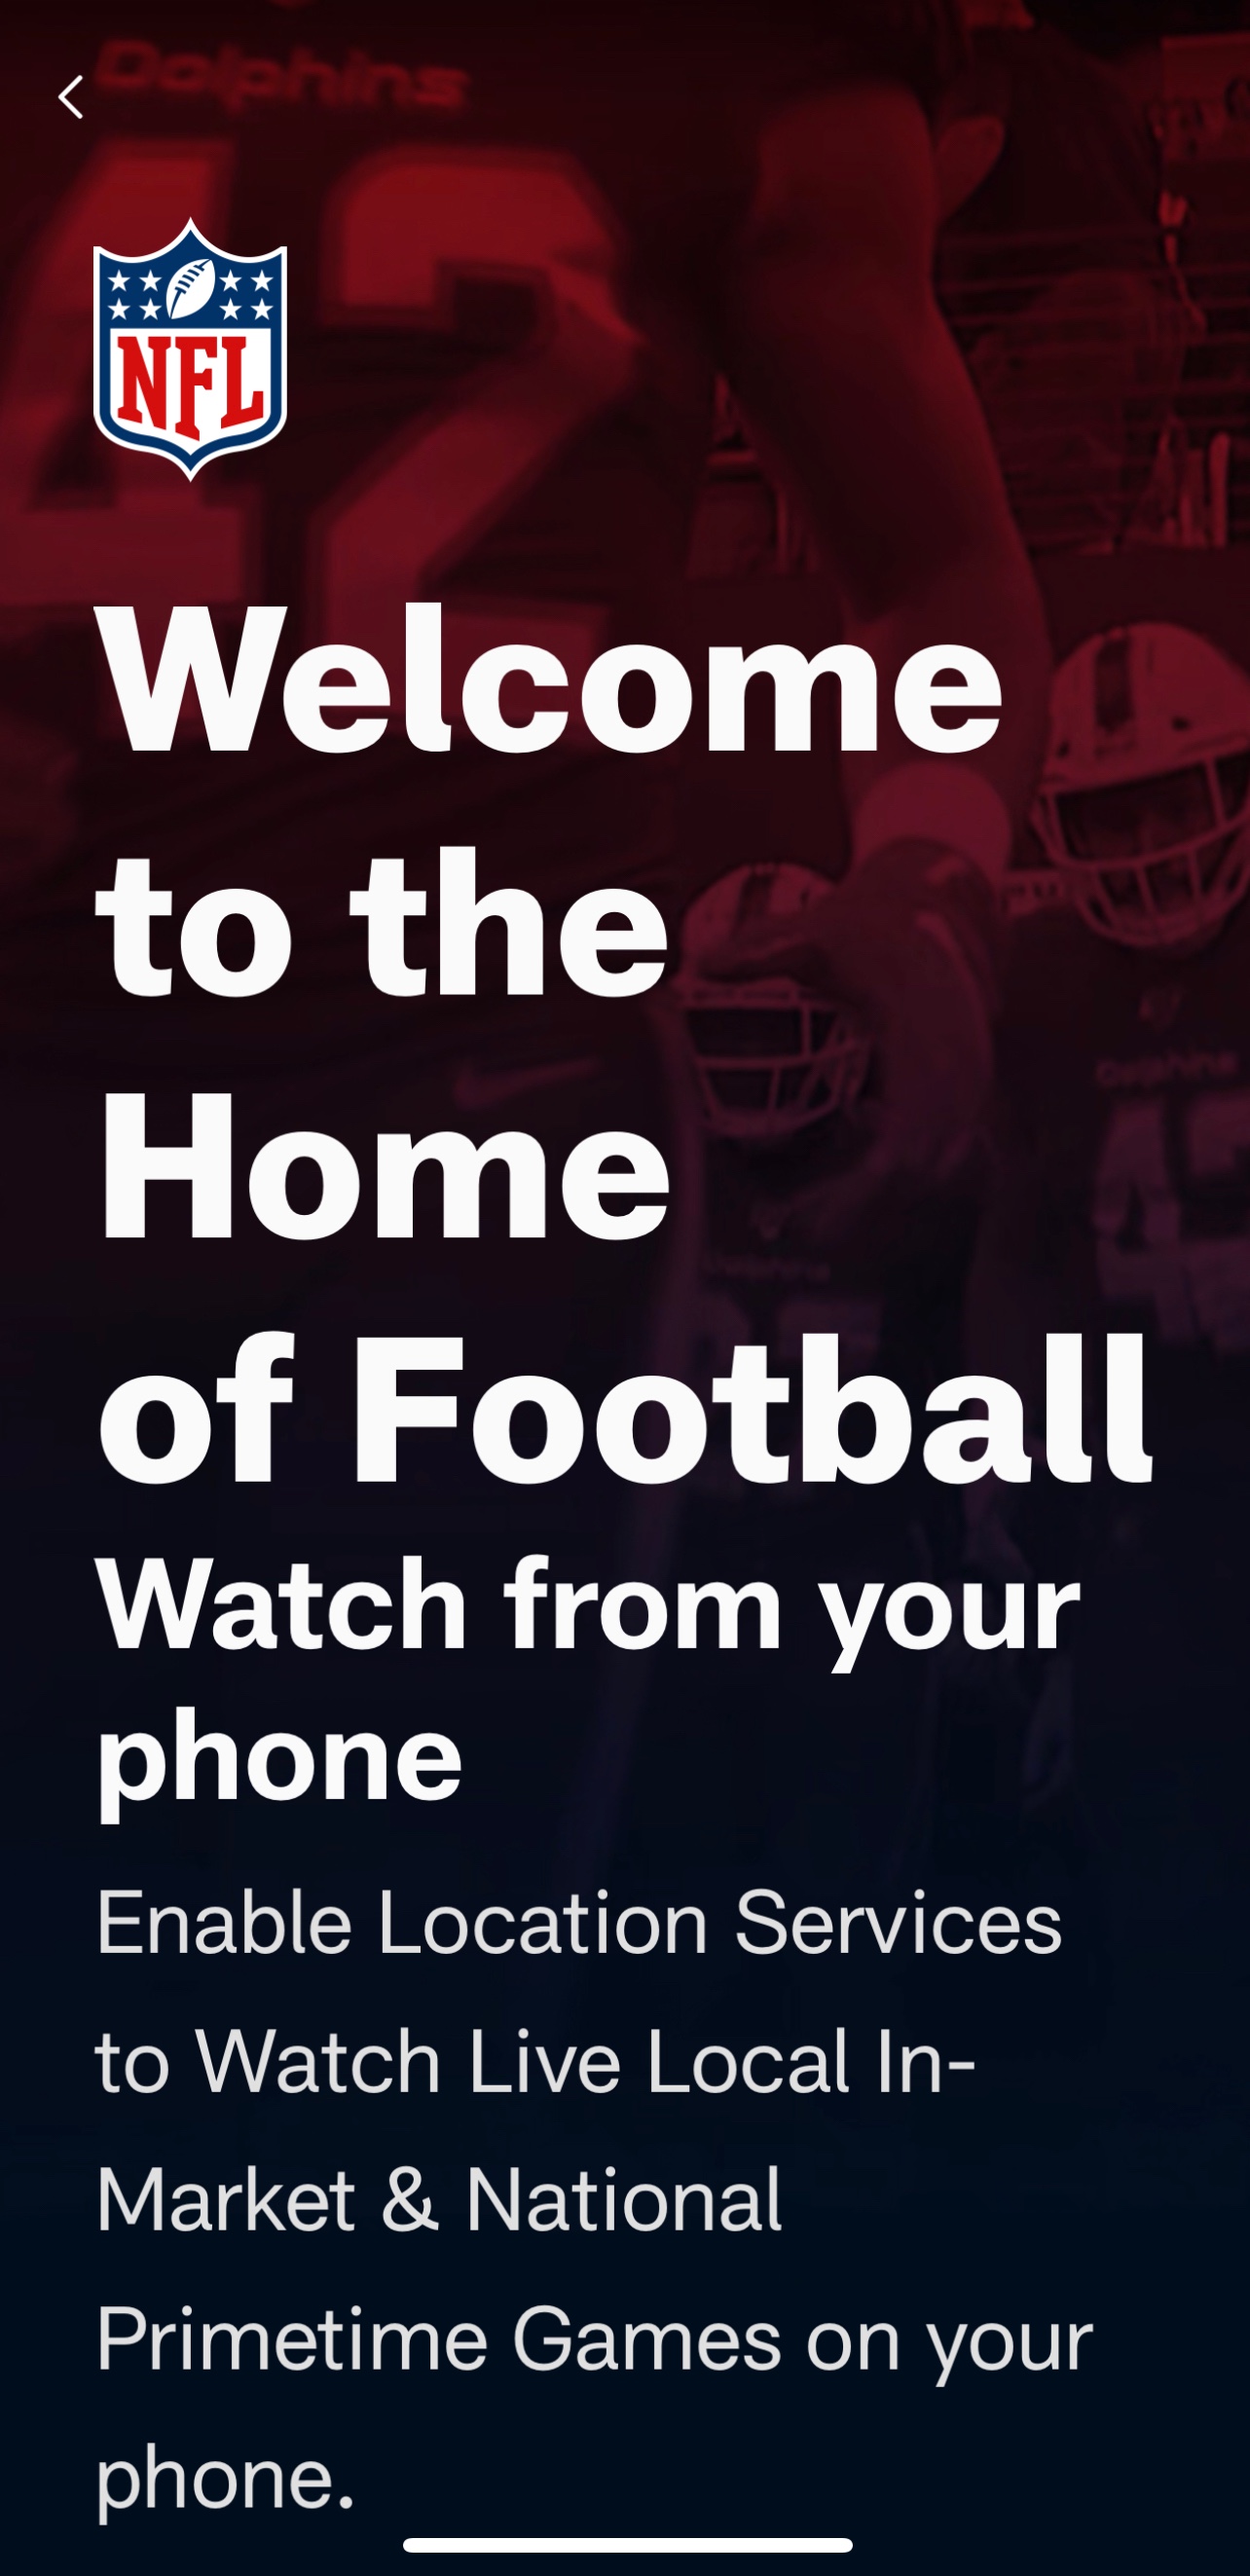 Issue with NFL since new phone